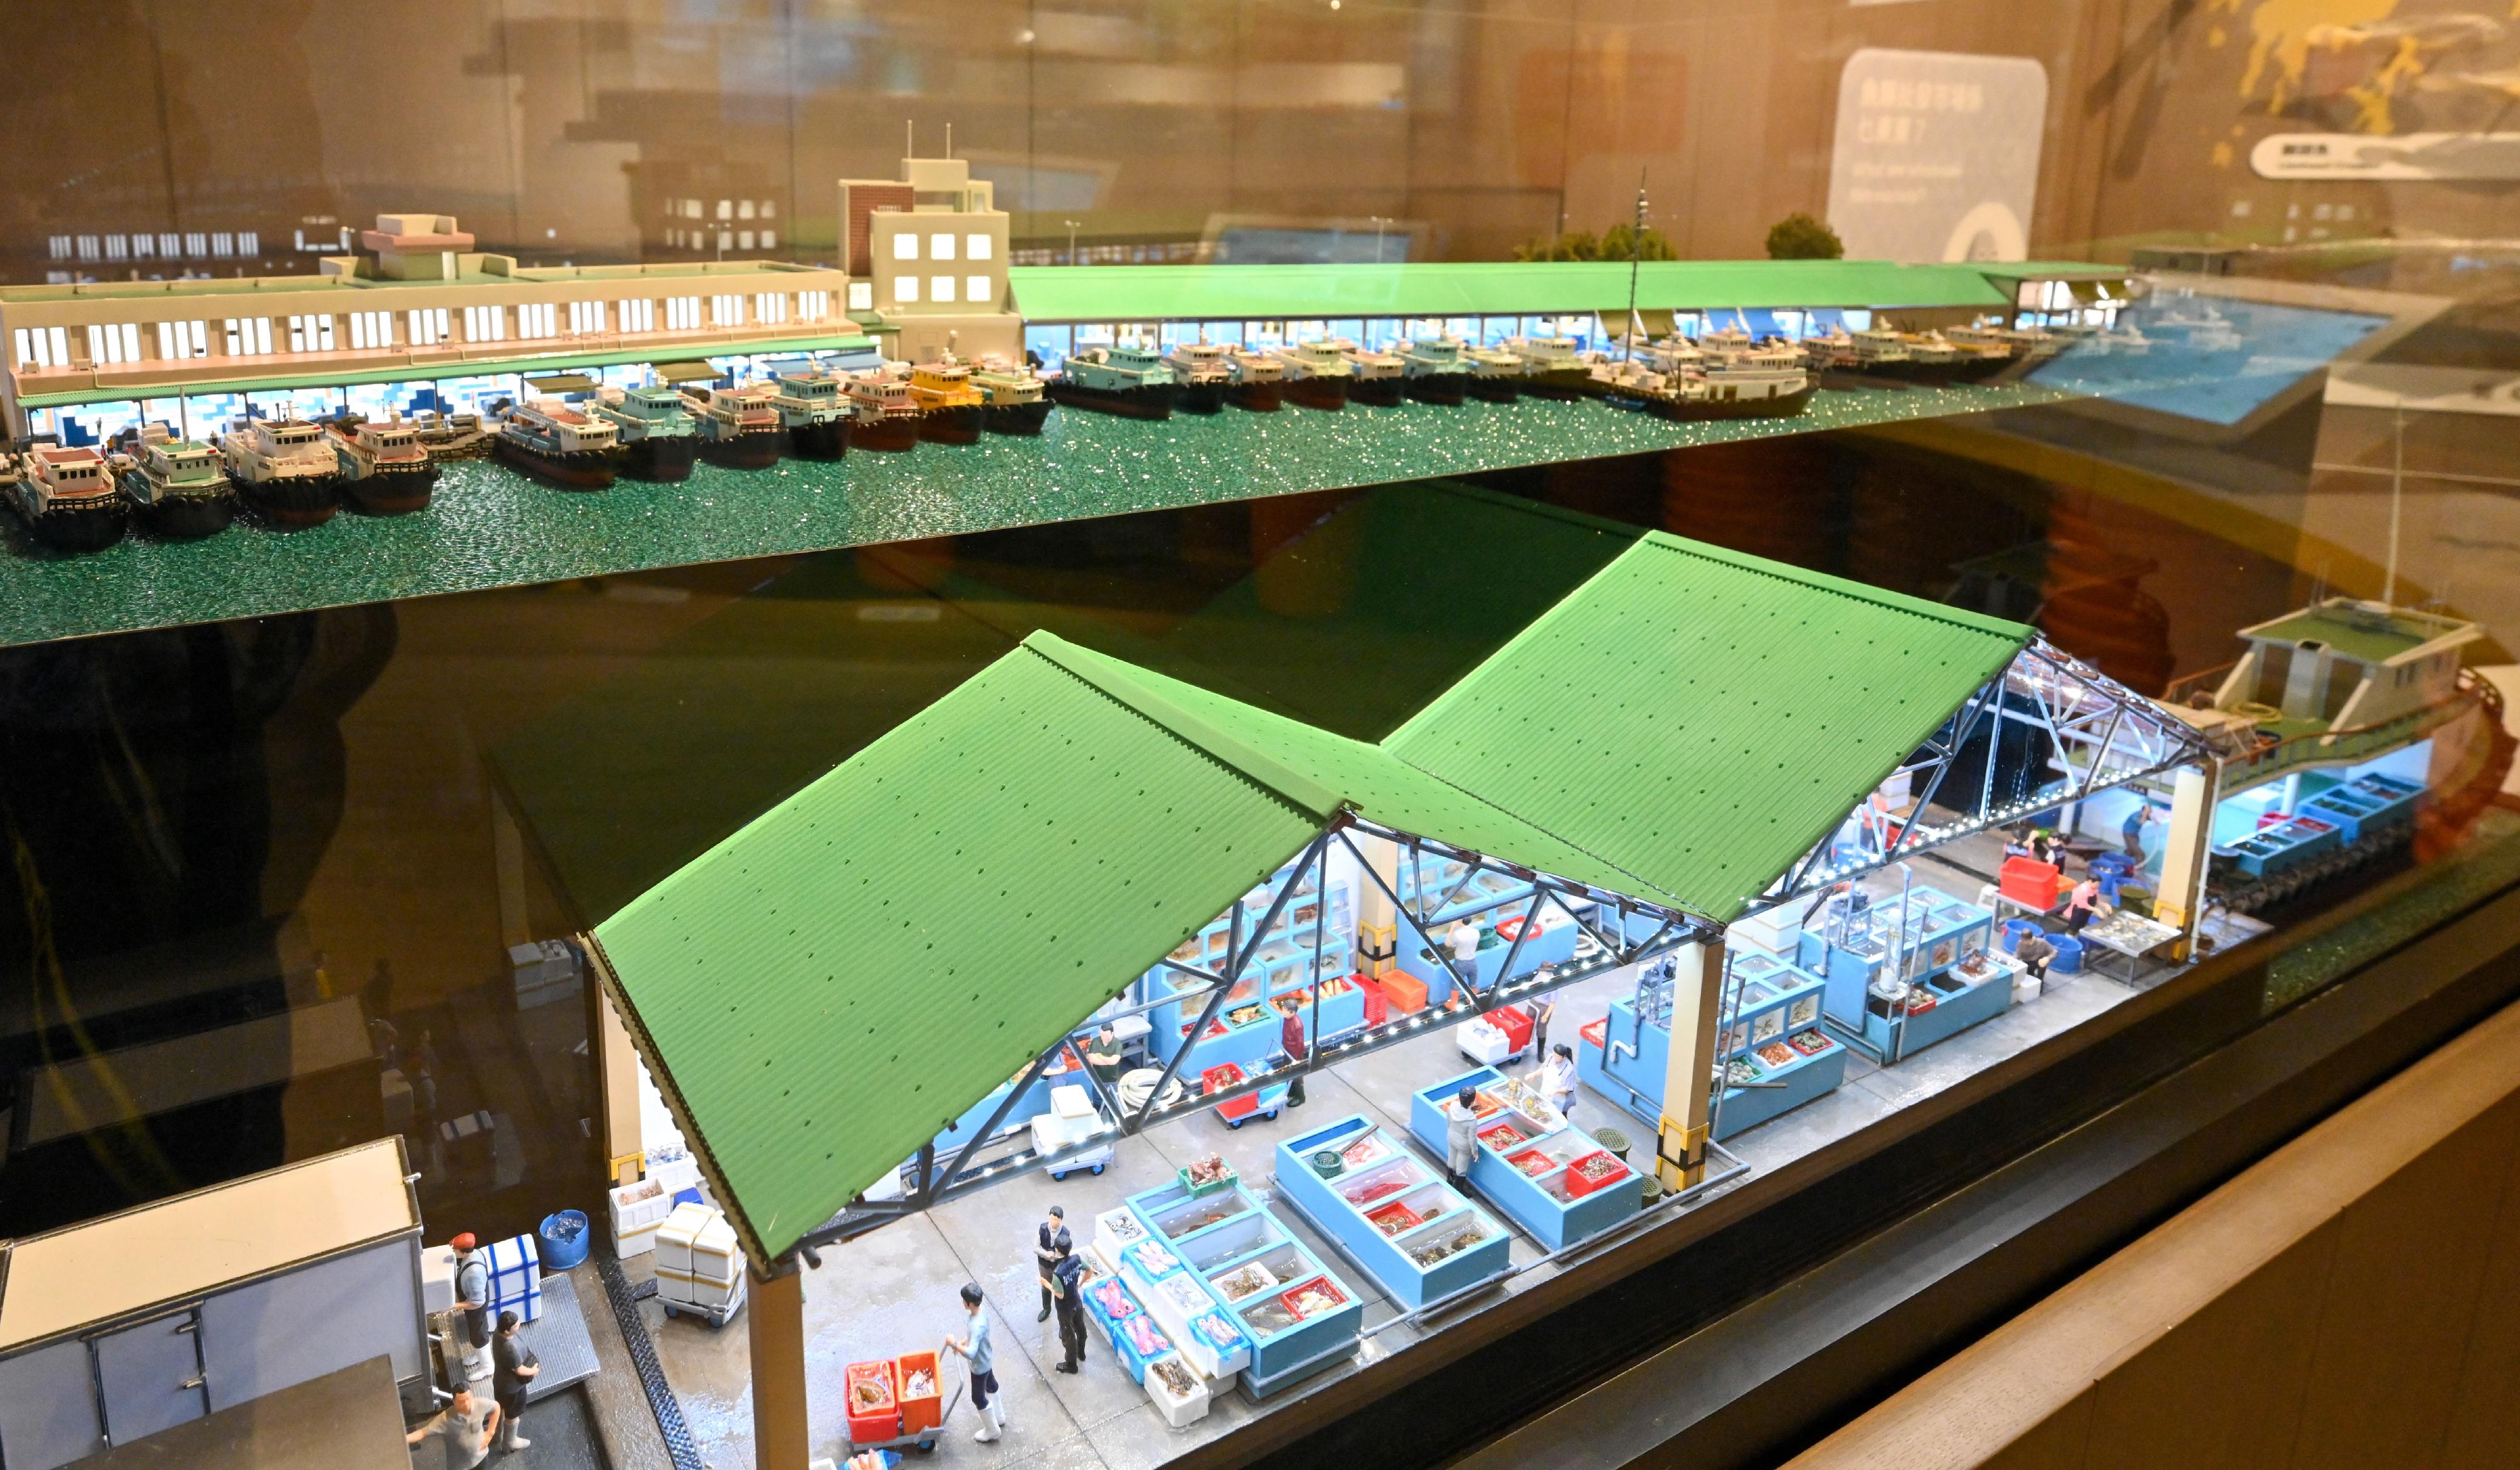 The Fisheries Hall located at the Lions Nature Education Centre at Tsiu Hang, Sai Kung, reopened today (December 16) upon completion of its revamp. Photo shows a miniature model of the Aberdeen Wholesale Fish Market.